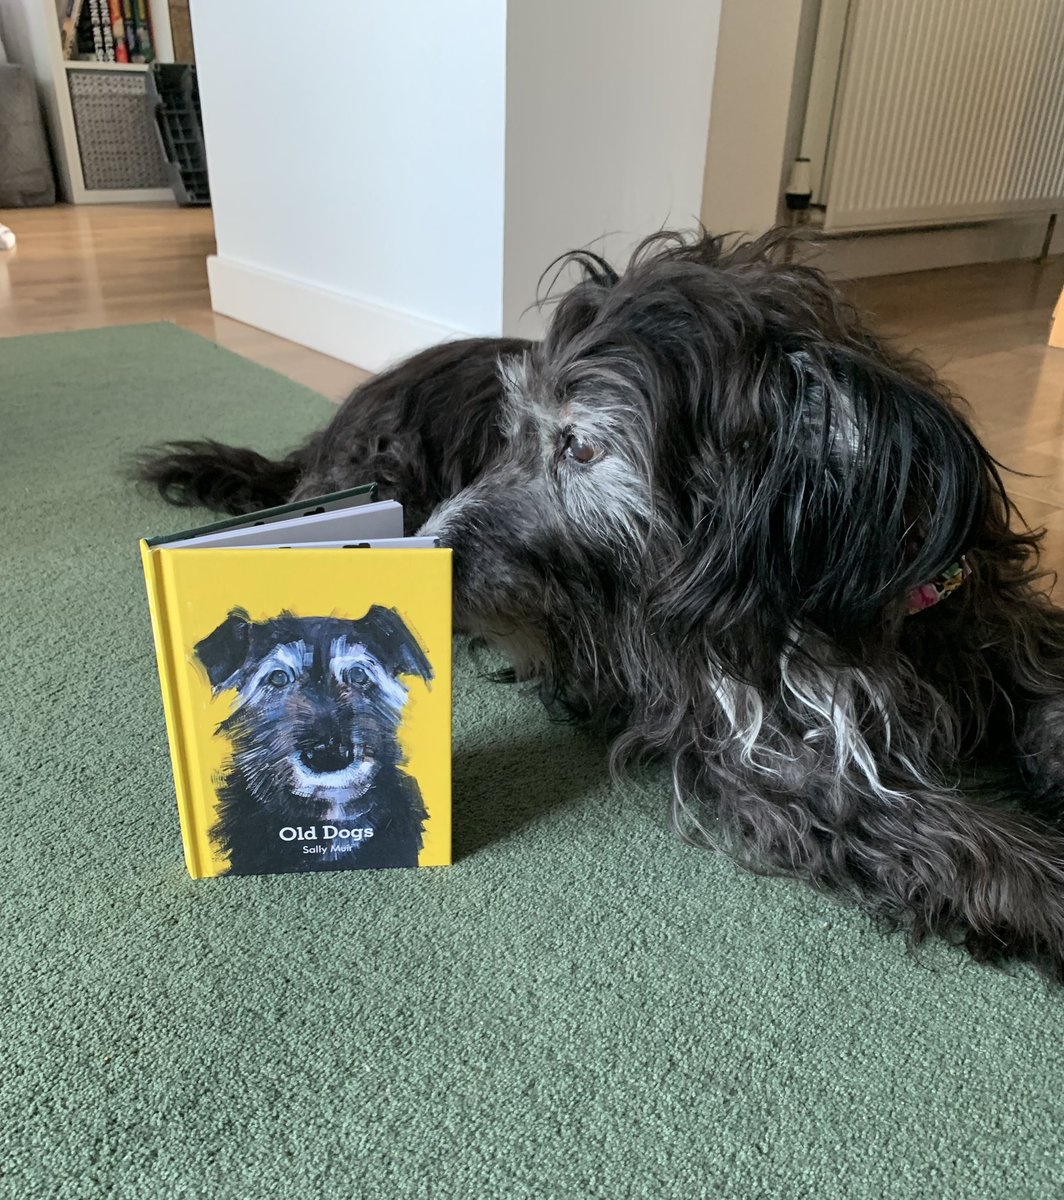 Beautiful book. Just had to buy it for my old girl. Really good of @salmuirAdogaday to put her on the cover… #seniordog #RescueDog #dogsoftwitter @ruskin147 @ScottishSPCA